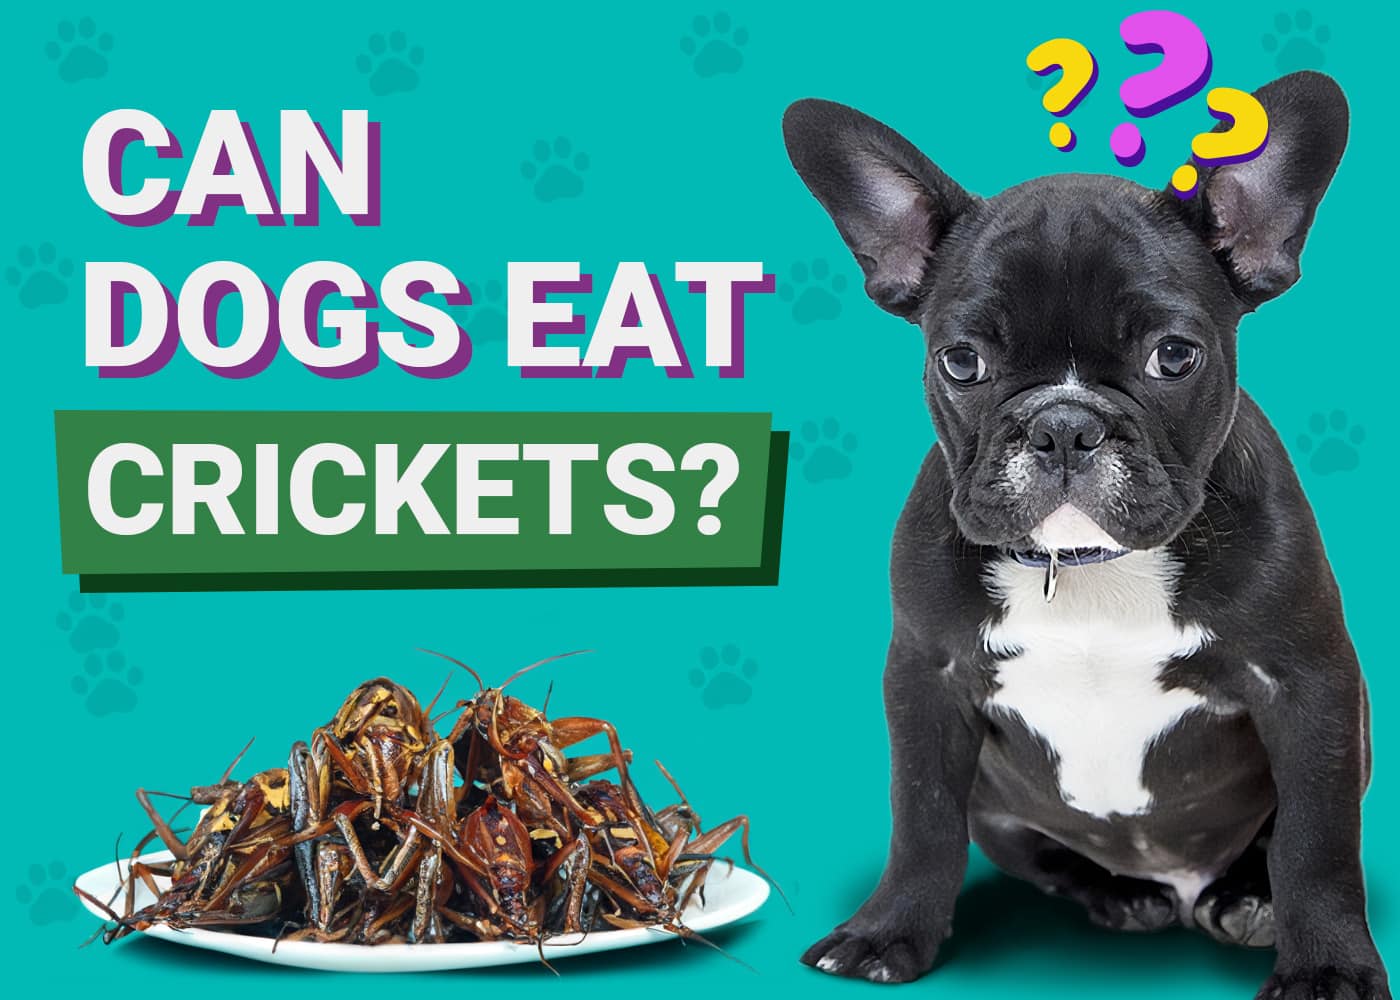 Can Dogs Eat Crickets